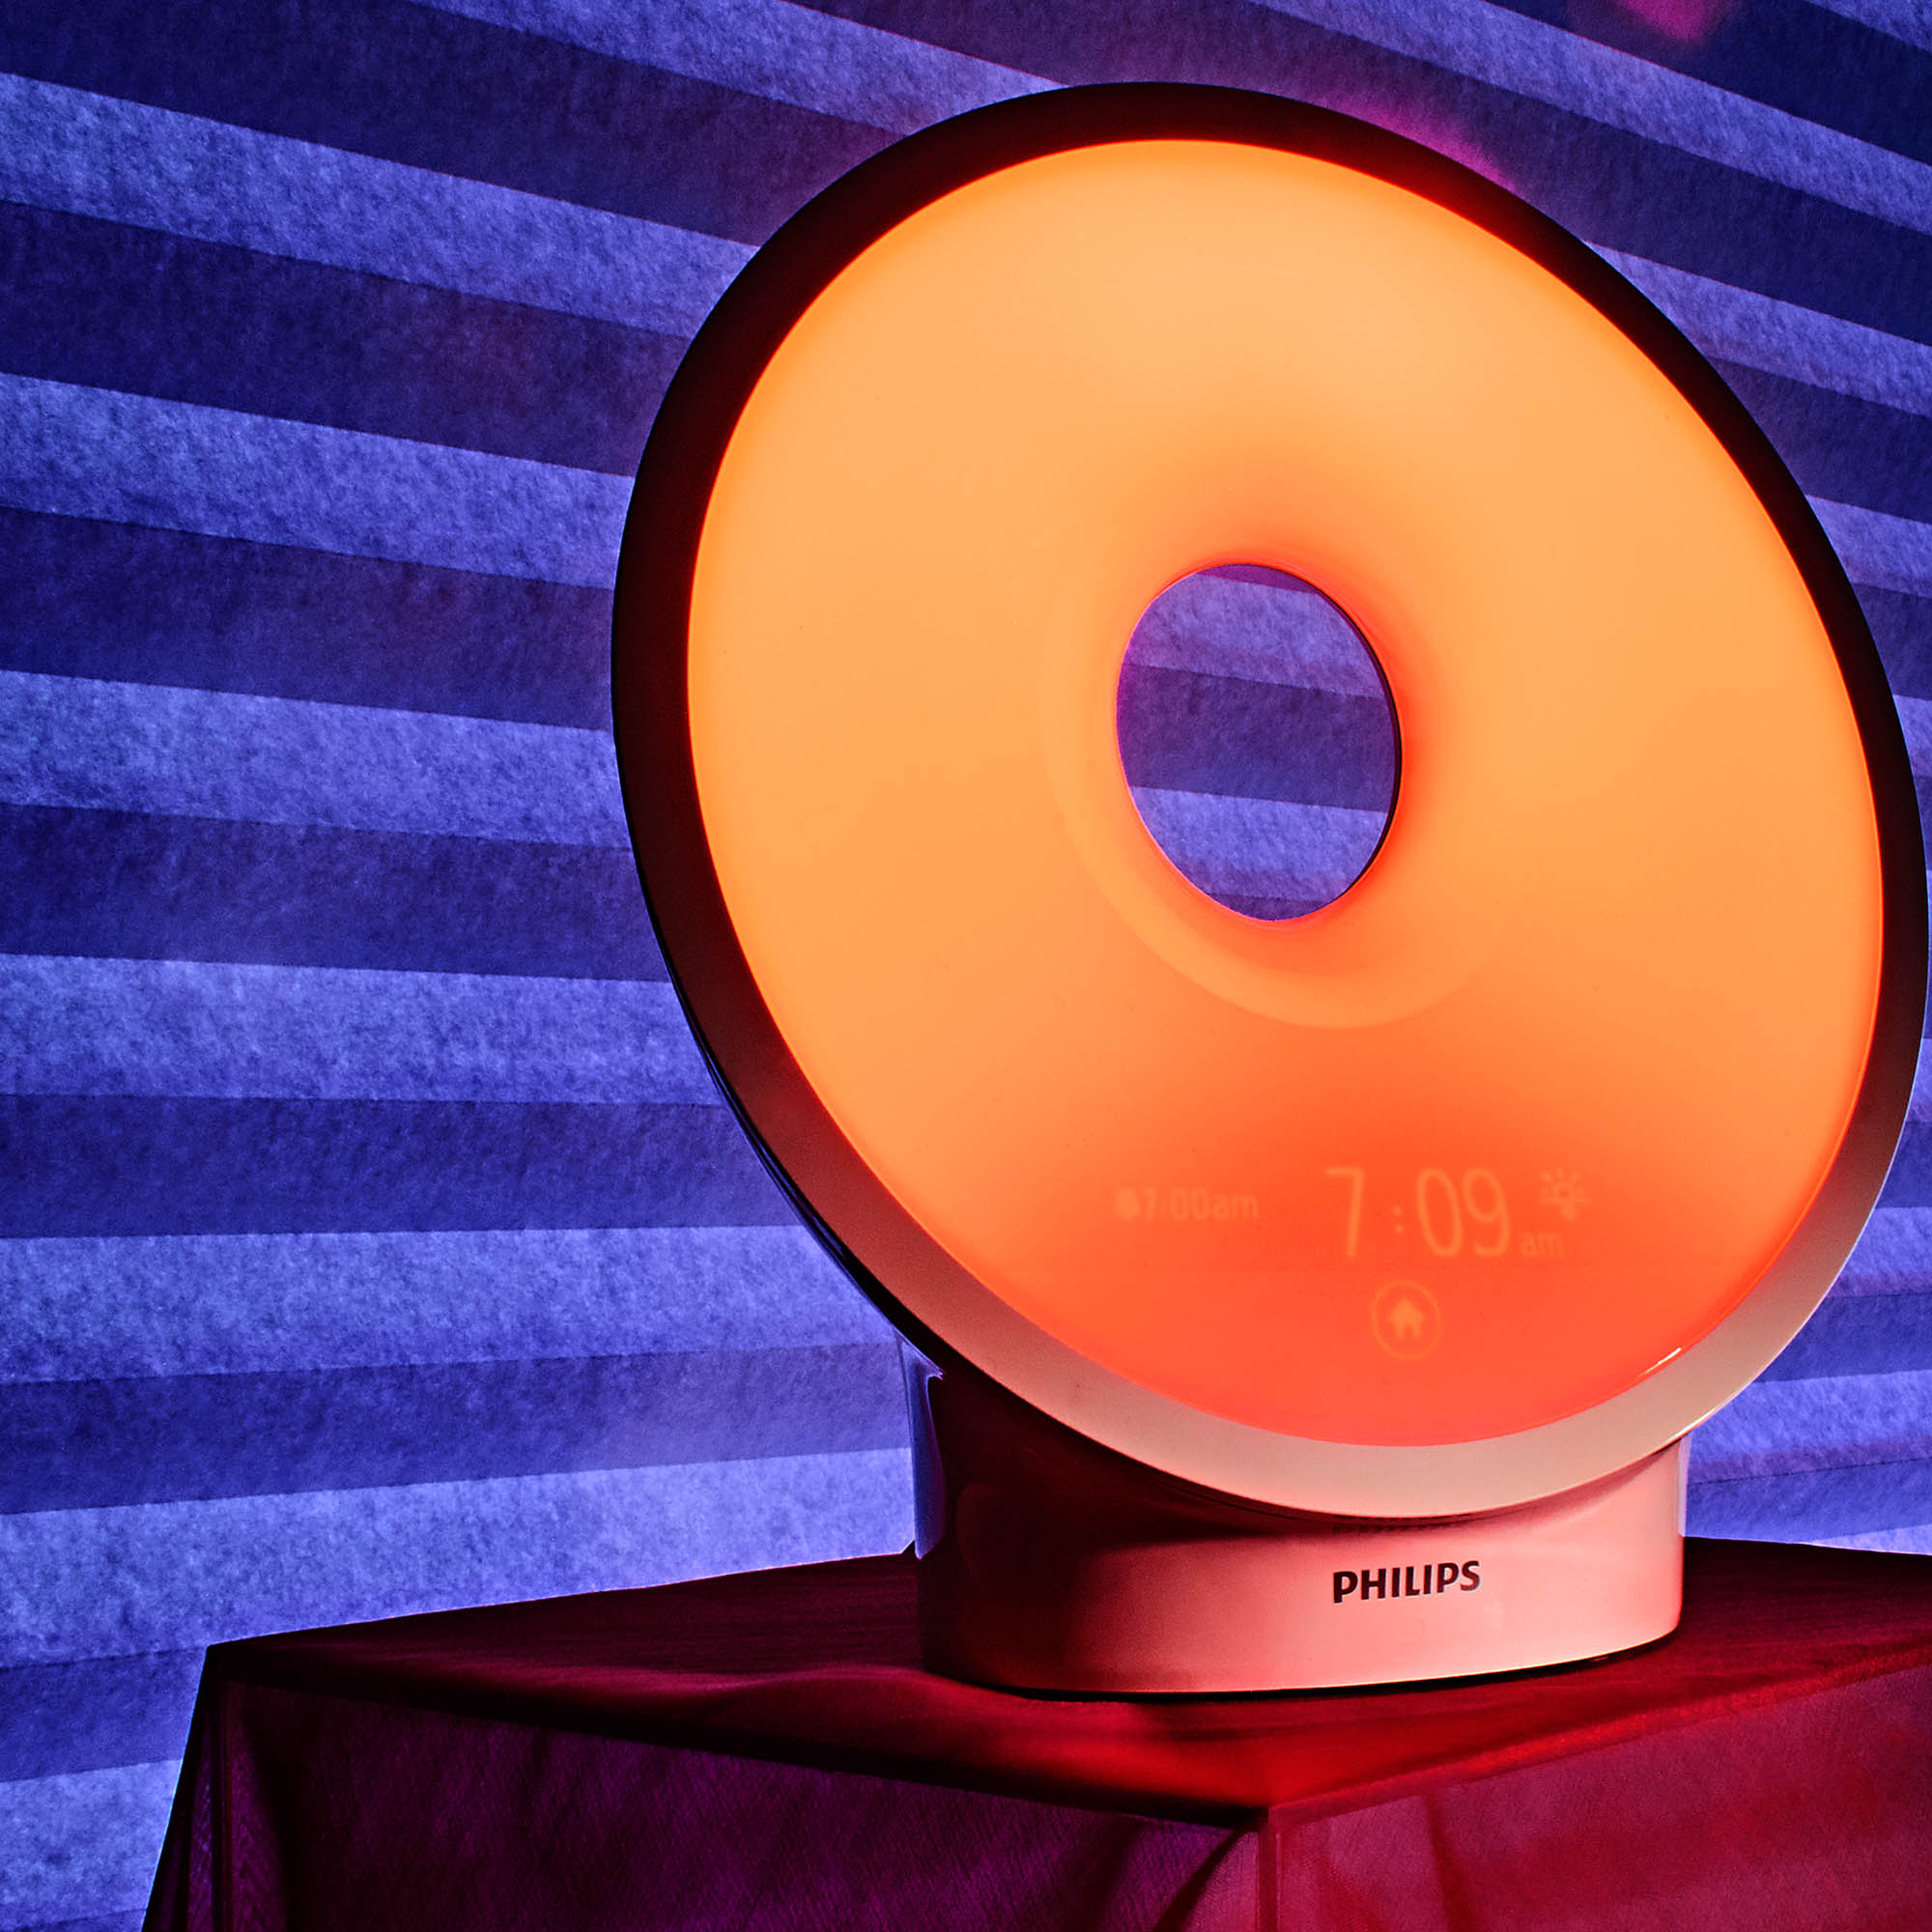 Does Philips' Wake-Up Light Work? We Tried It!